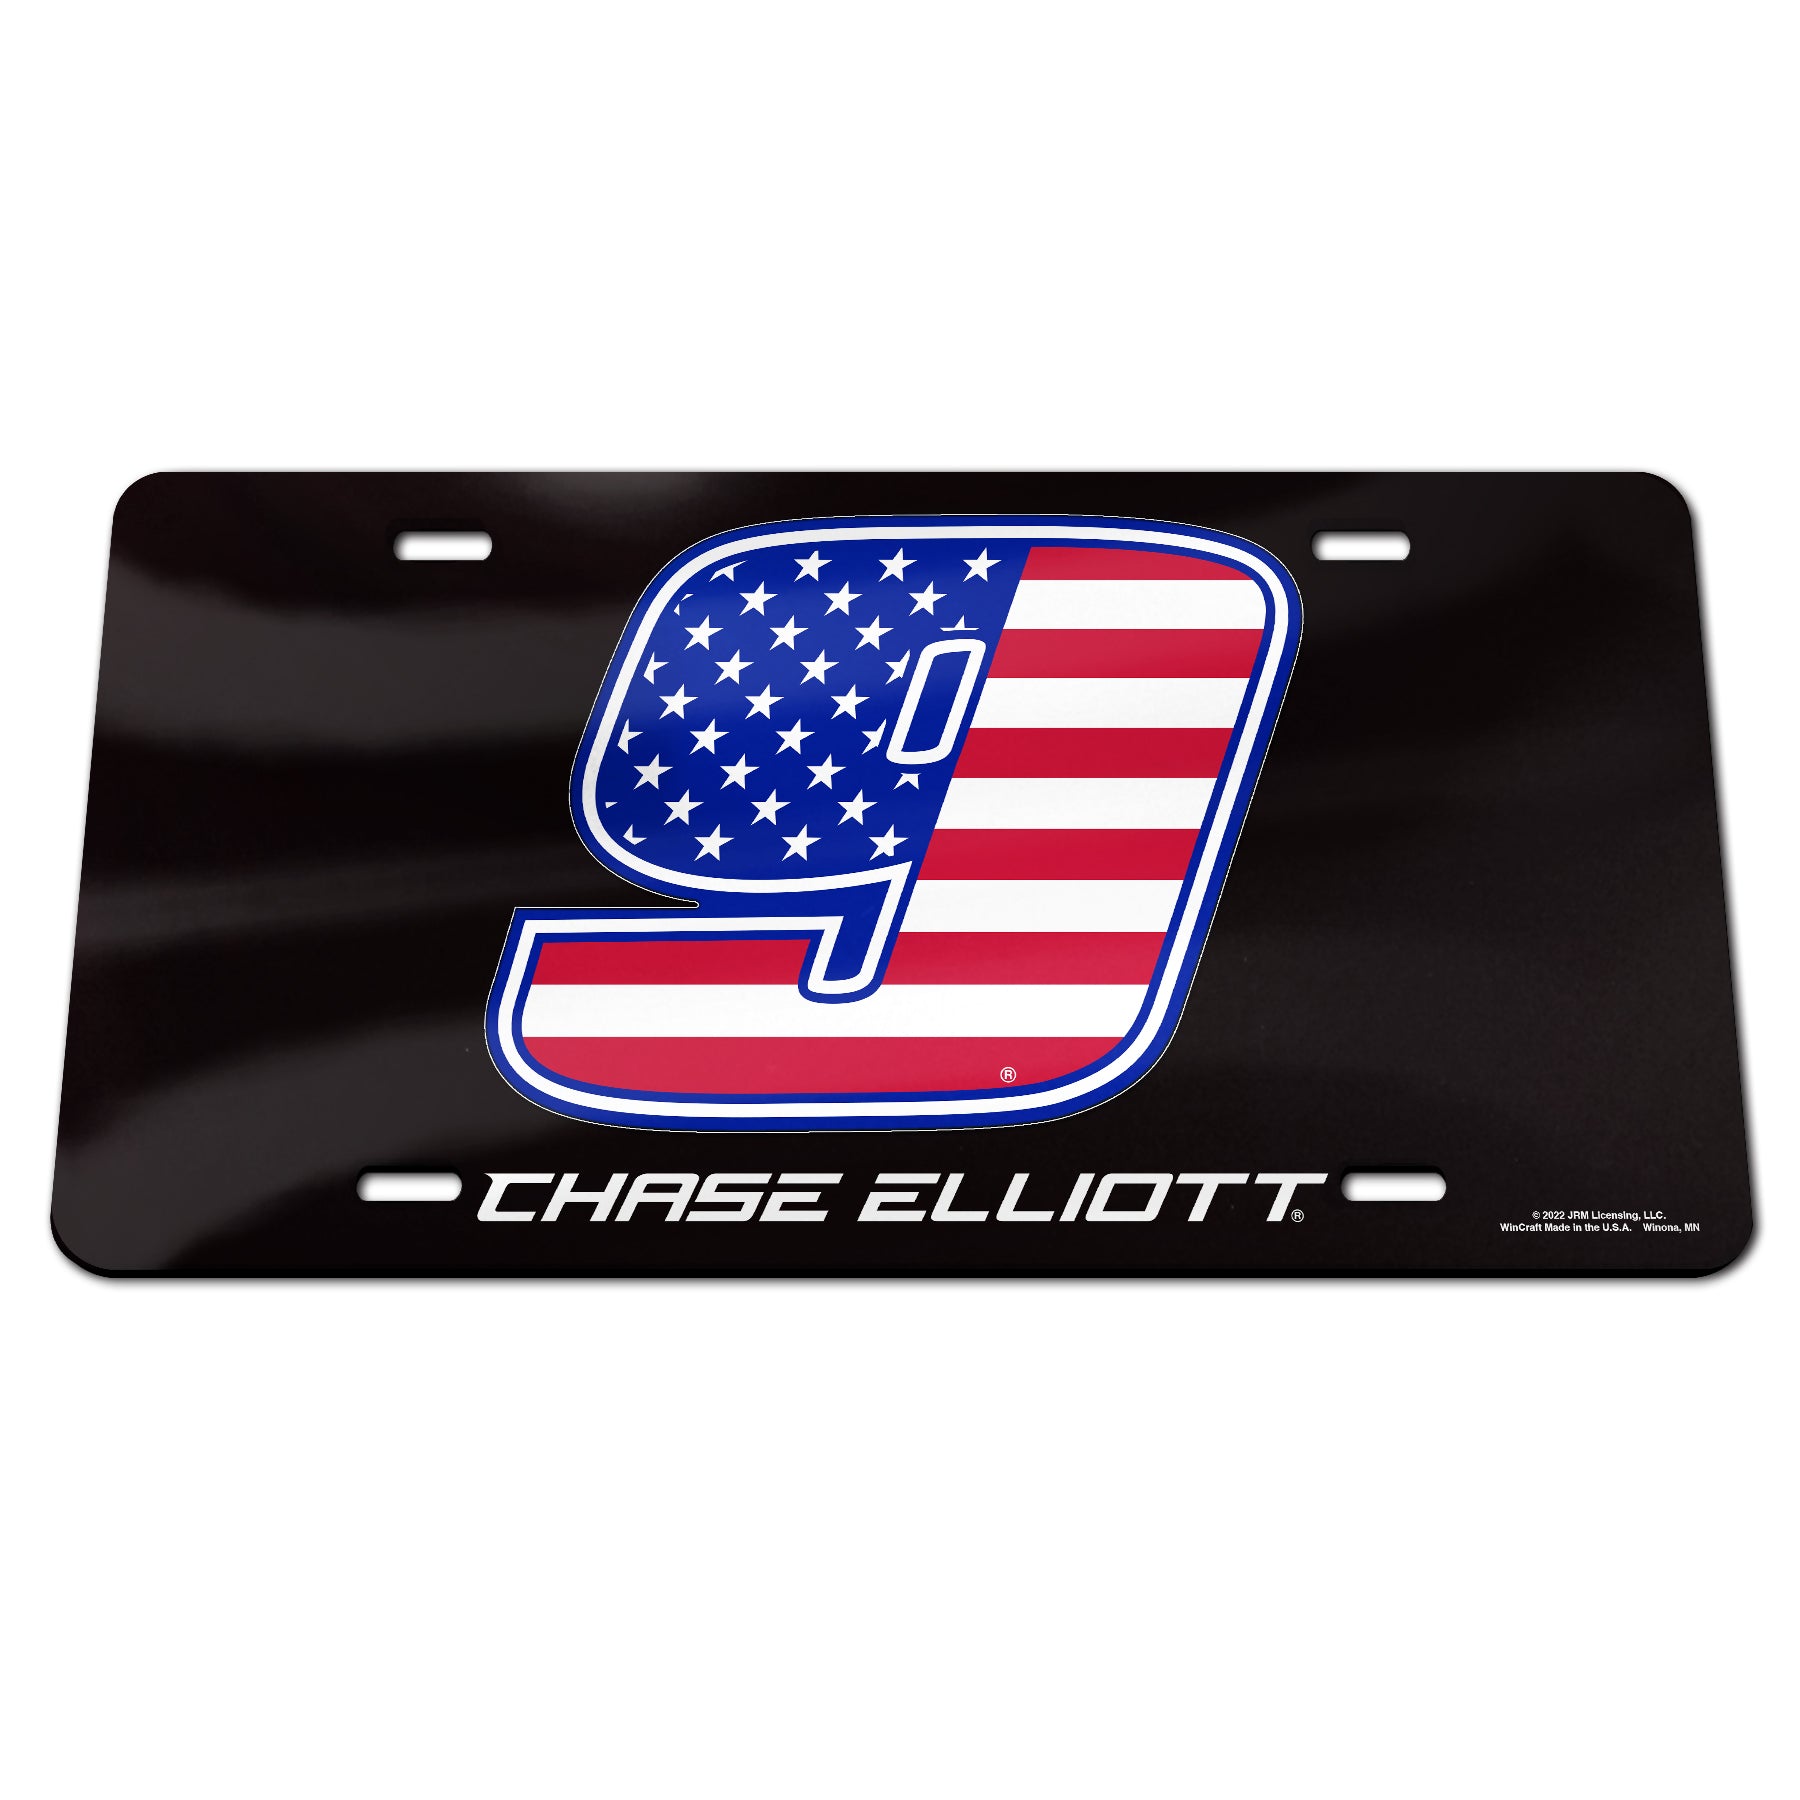 DELUXE AMERICAN 9 LICENSE PLATE